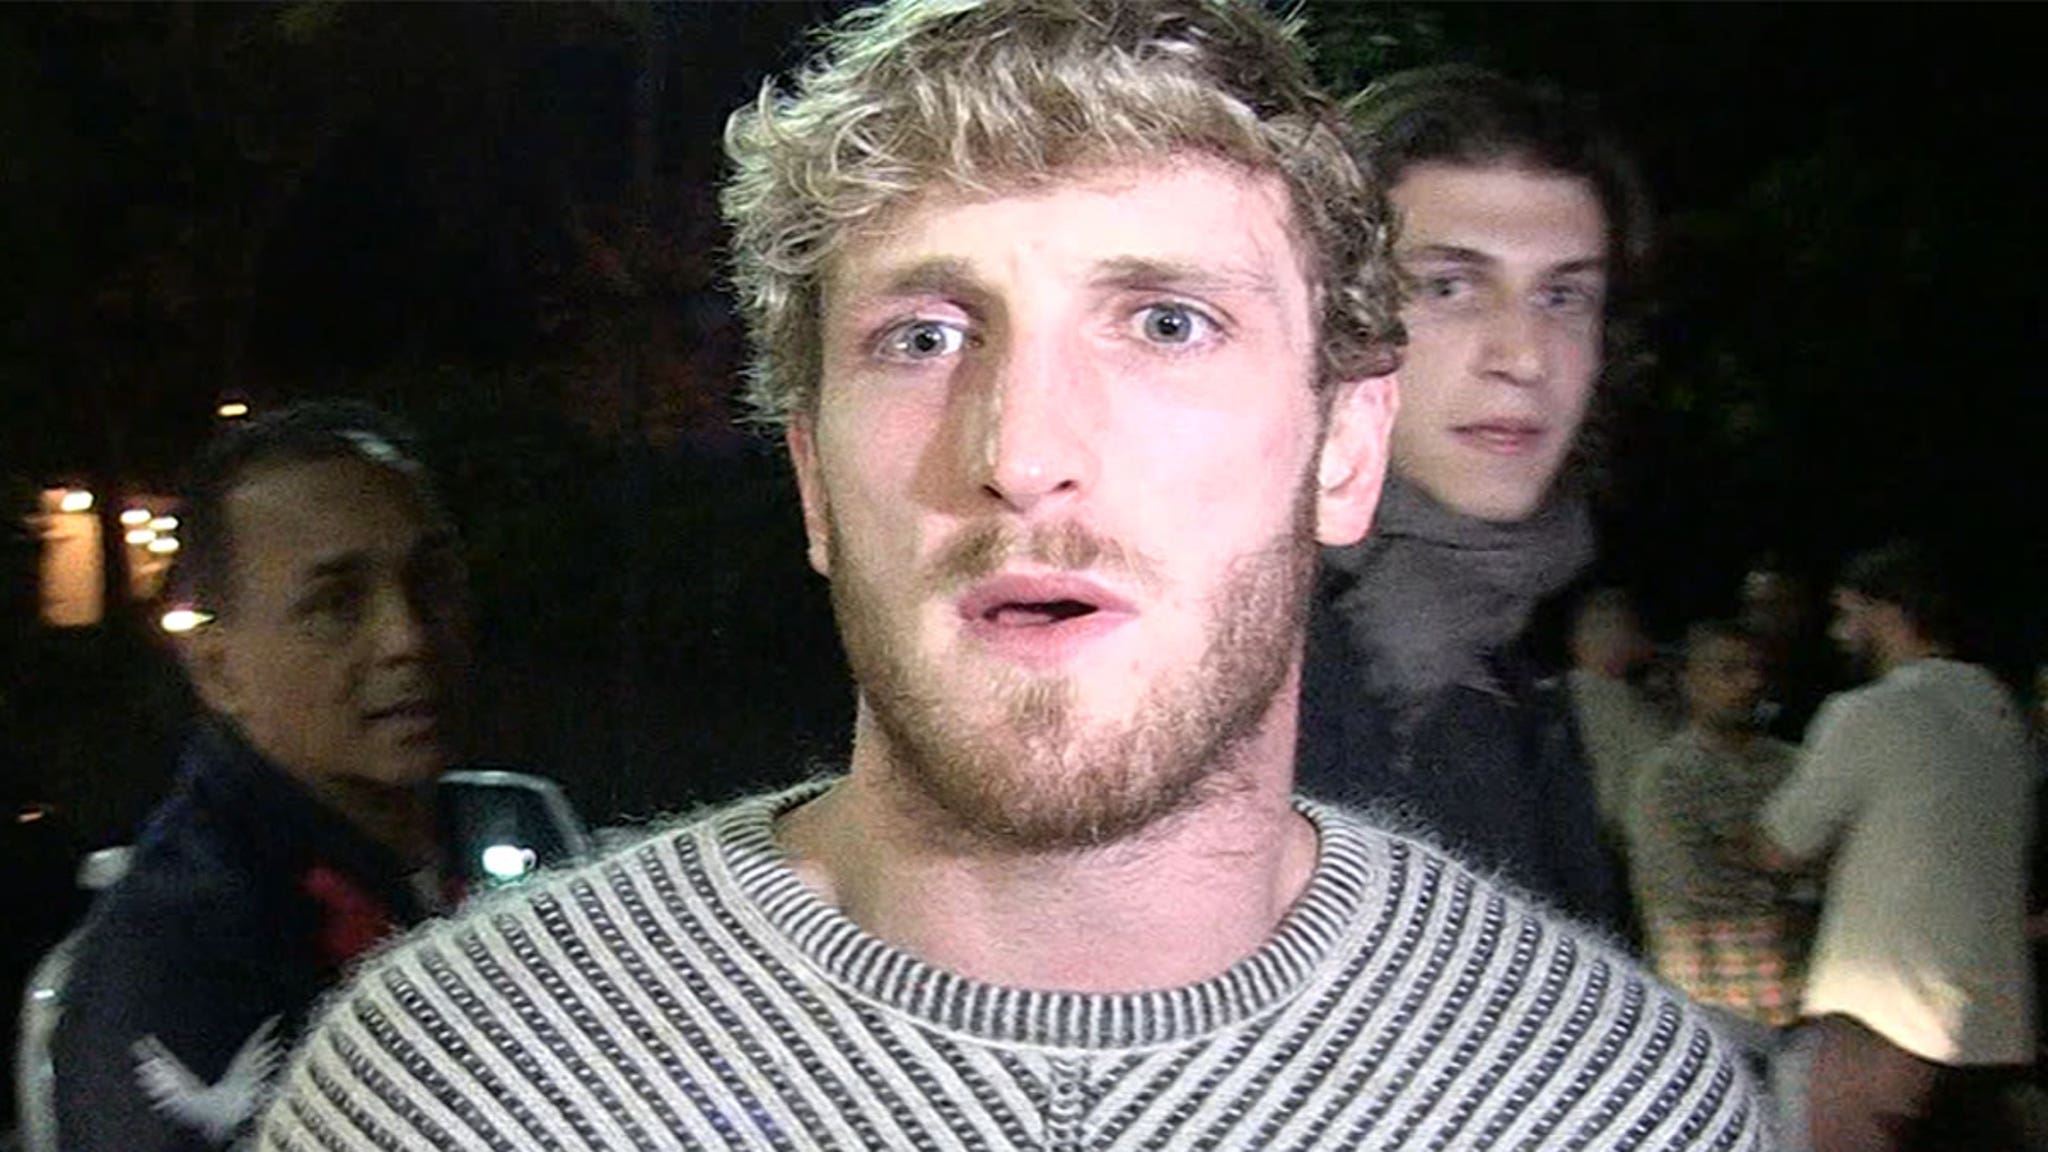 Logan Paul Loses to KSI in Controversial Boxing Rematch